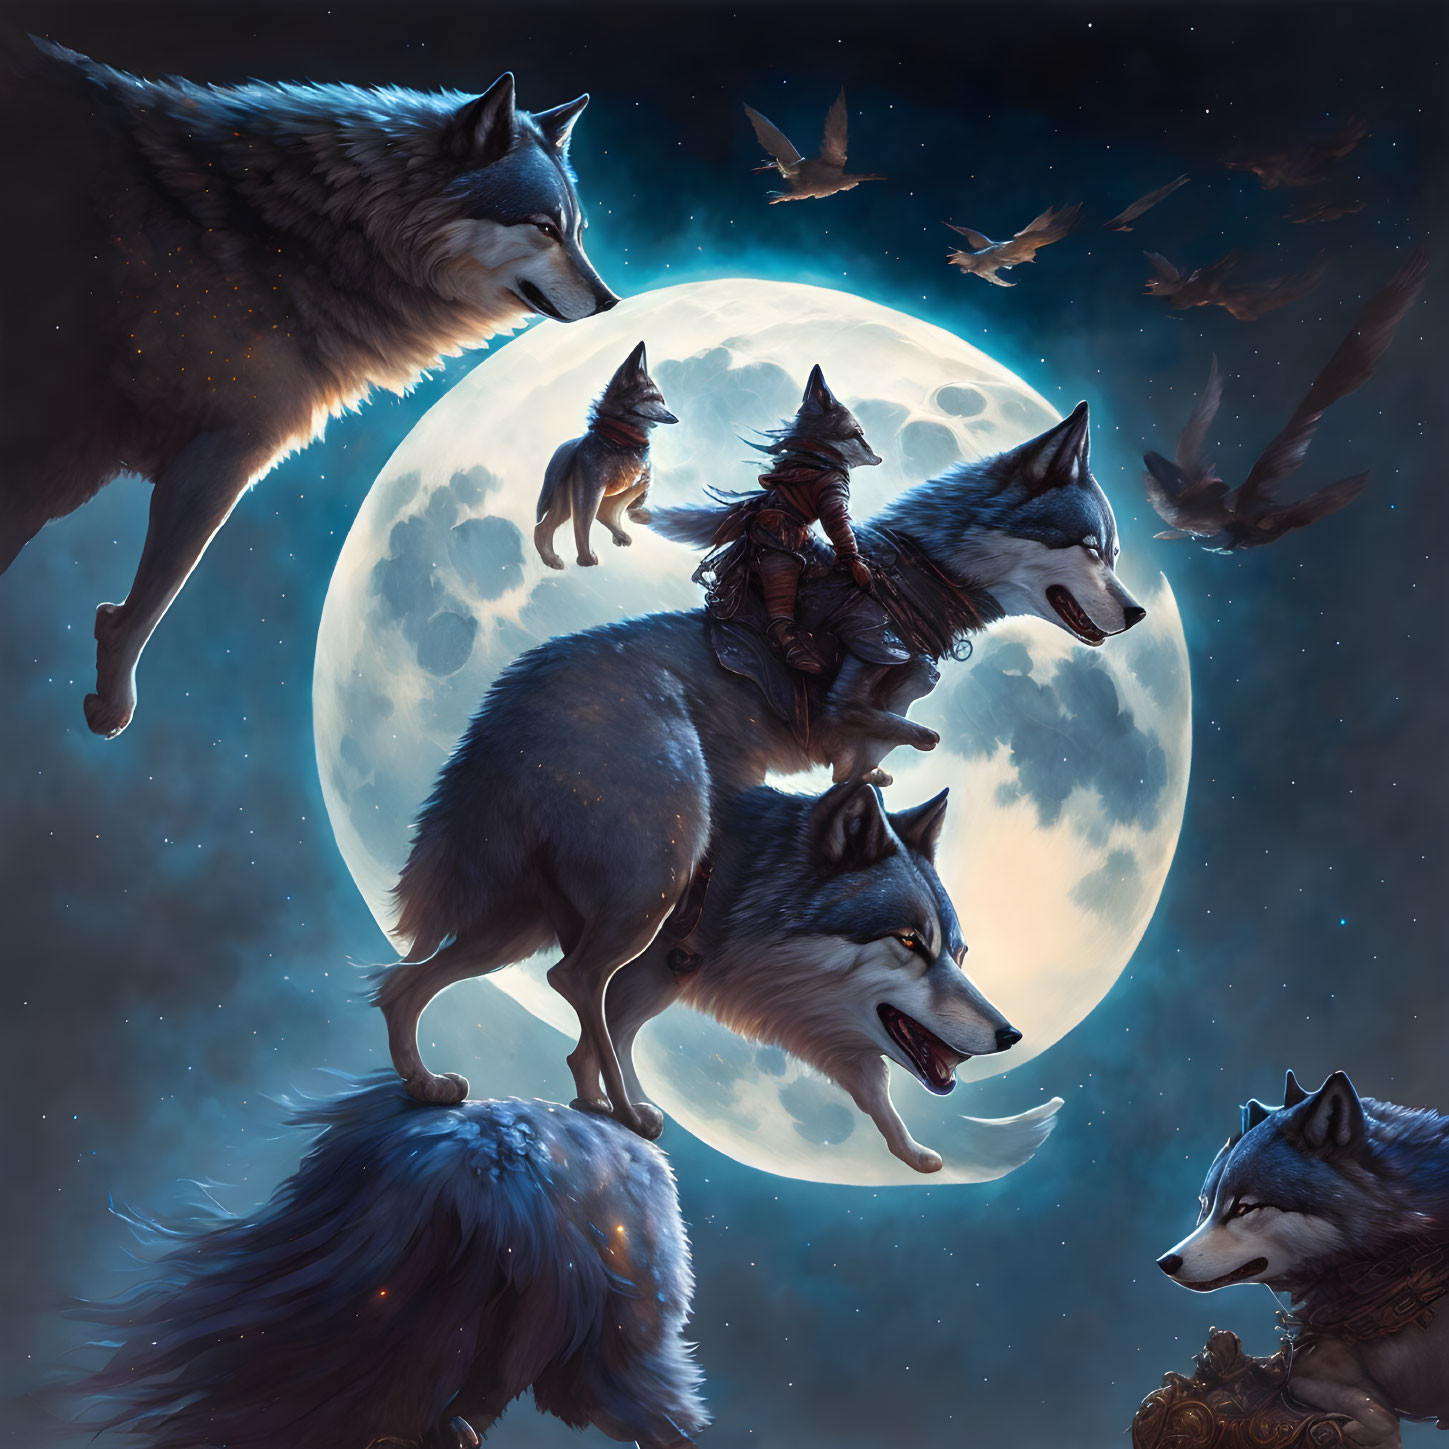 Fantasy art of wolves howling under full moon with bats in starry night.